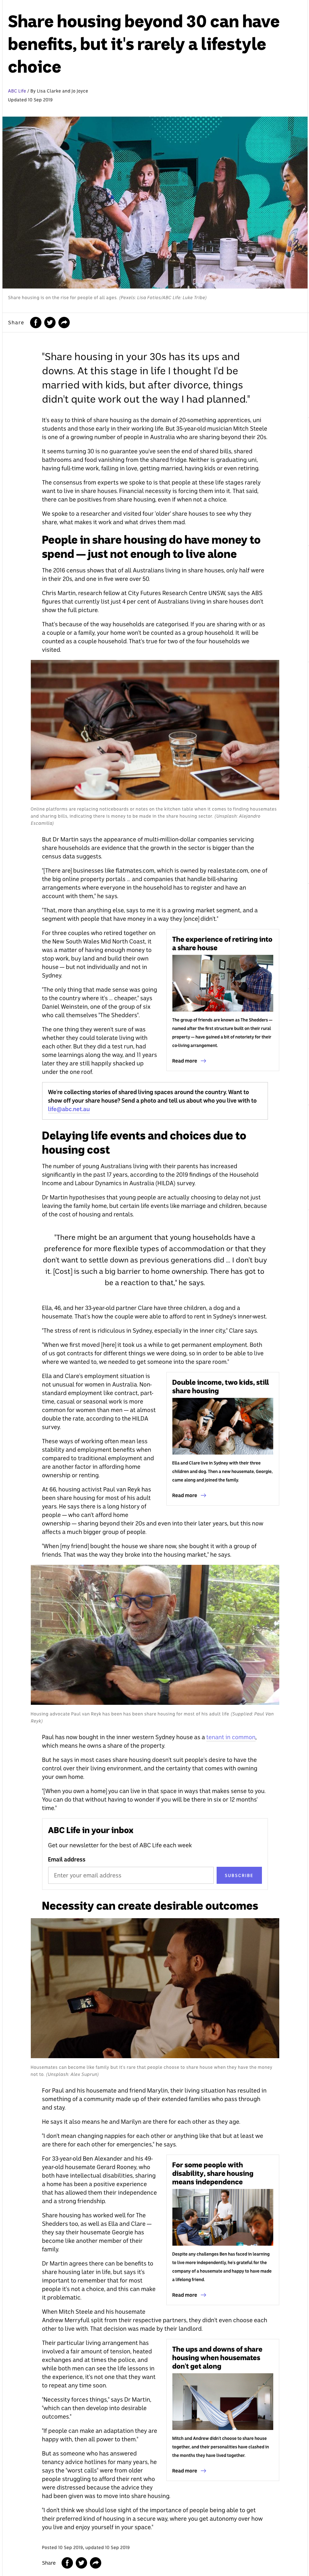 screencapture-abc-net-au-life-why-we-are-share-housing-beyond-30s-11076306-2019-11-25-20_07_51.png